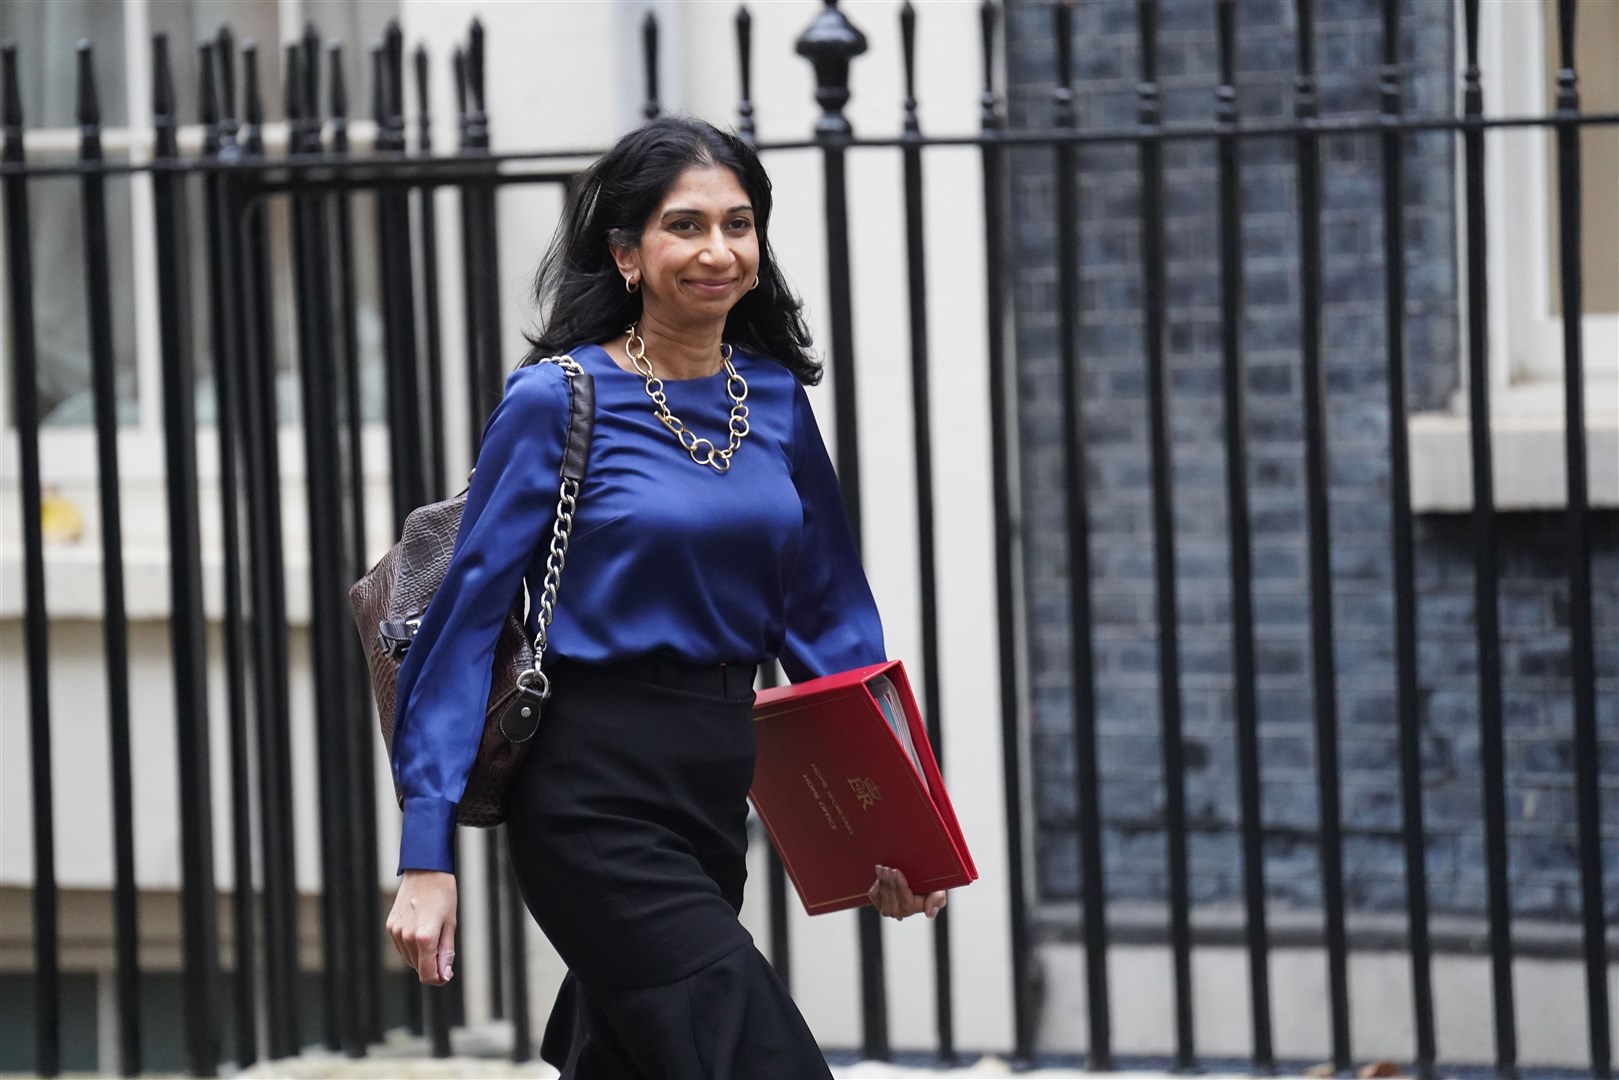 Home Secretary Suella Braverman has offered tough language as she promises to crack down on illegal migration (James Manning/PA)